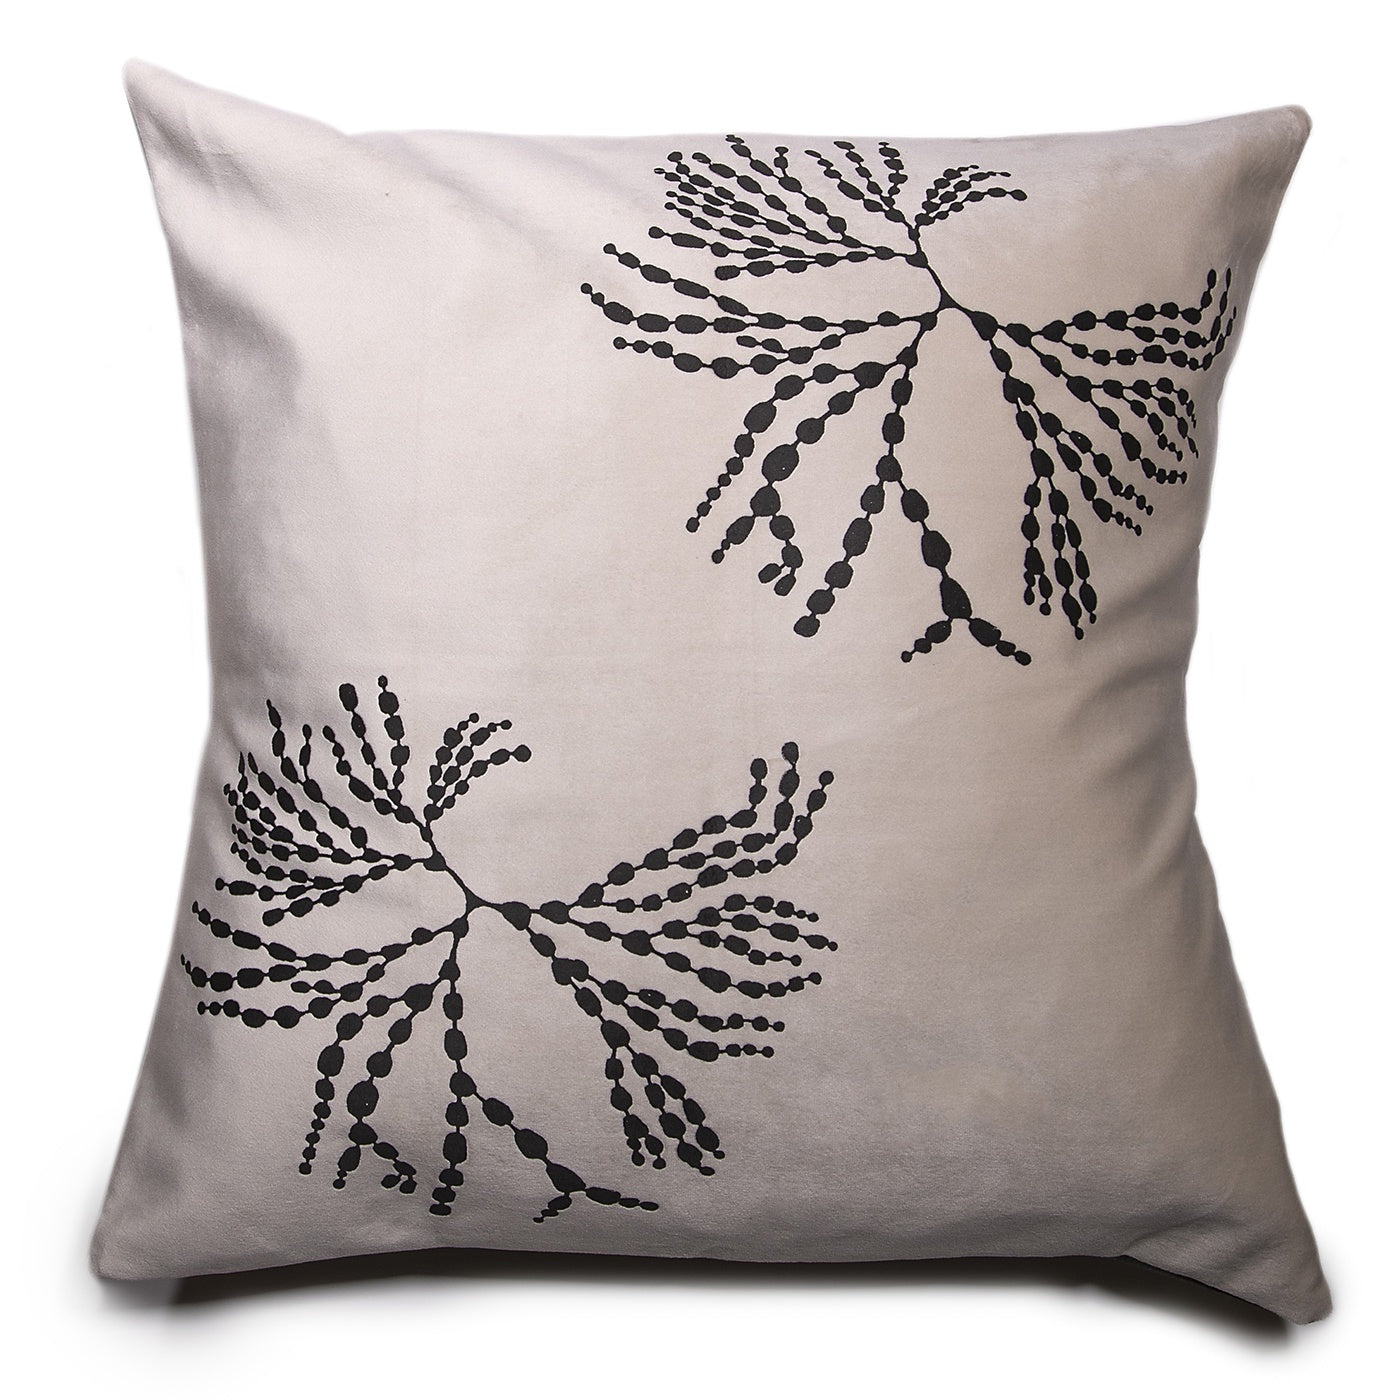 Stalley Textile Co. - Cushion Cover - Bubbleweed - Black on Cream